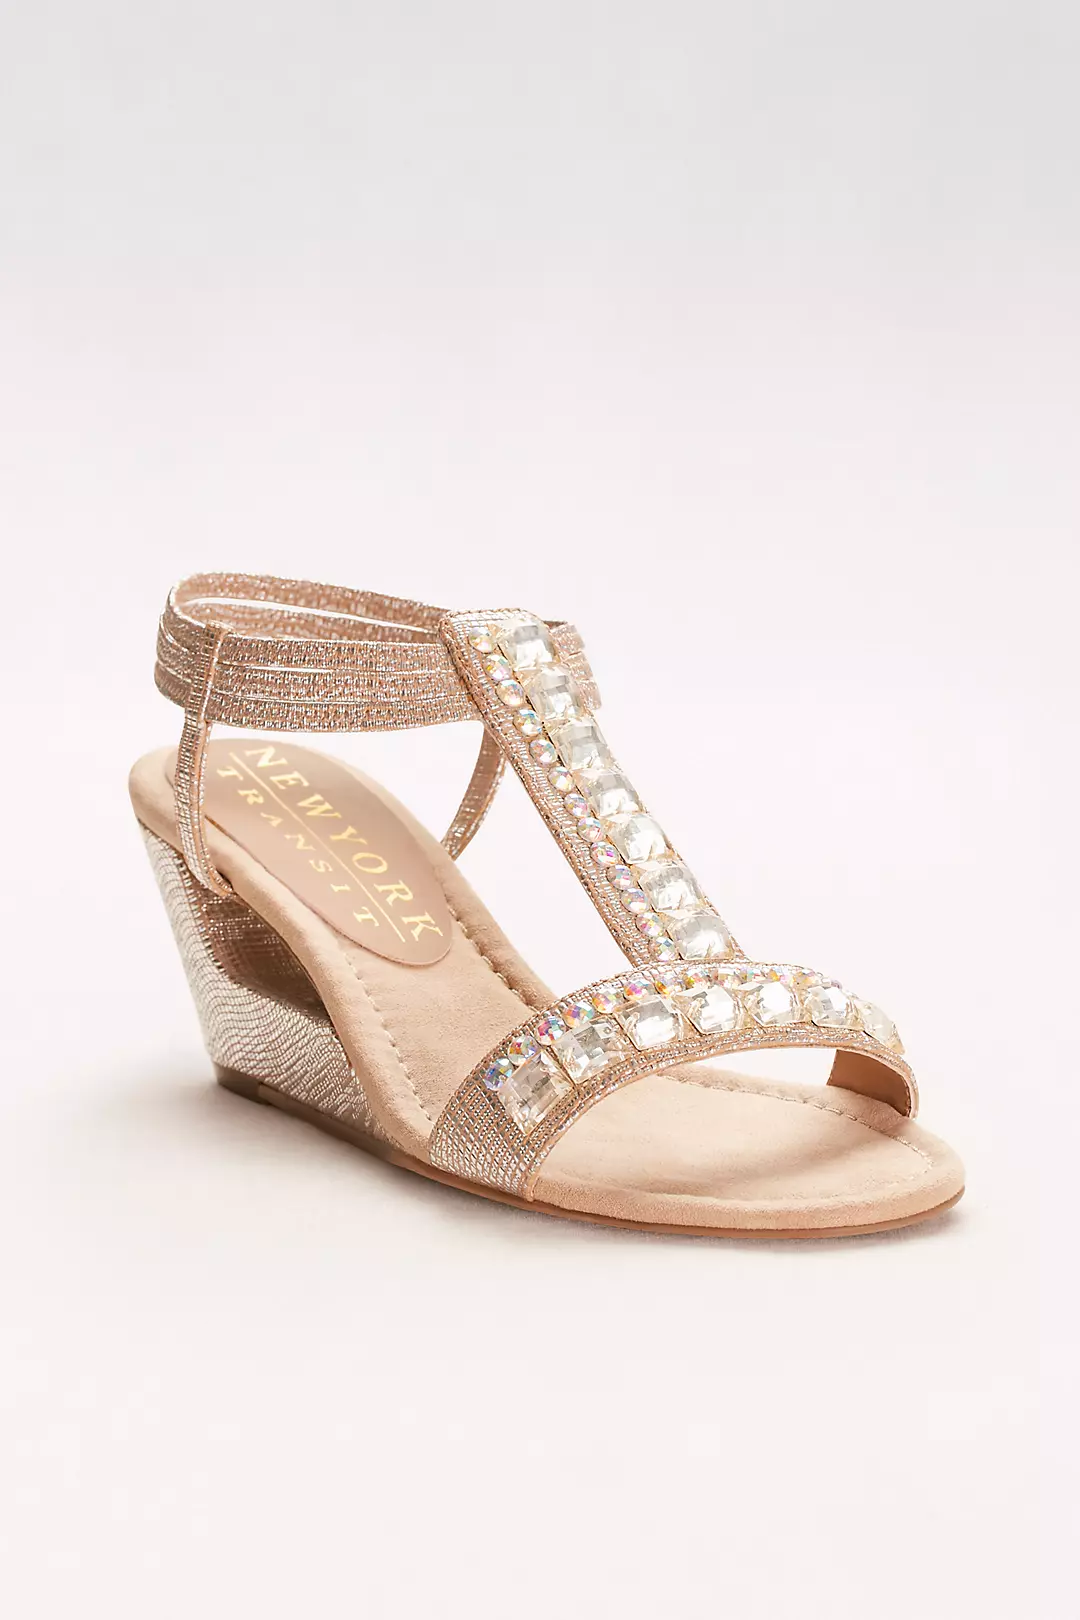 Double Crystal T-Strap Wedges Image